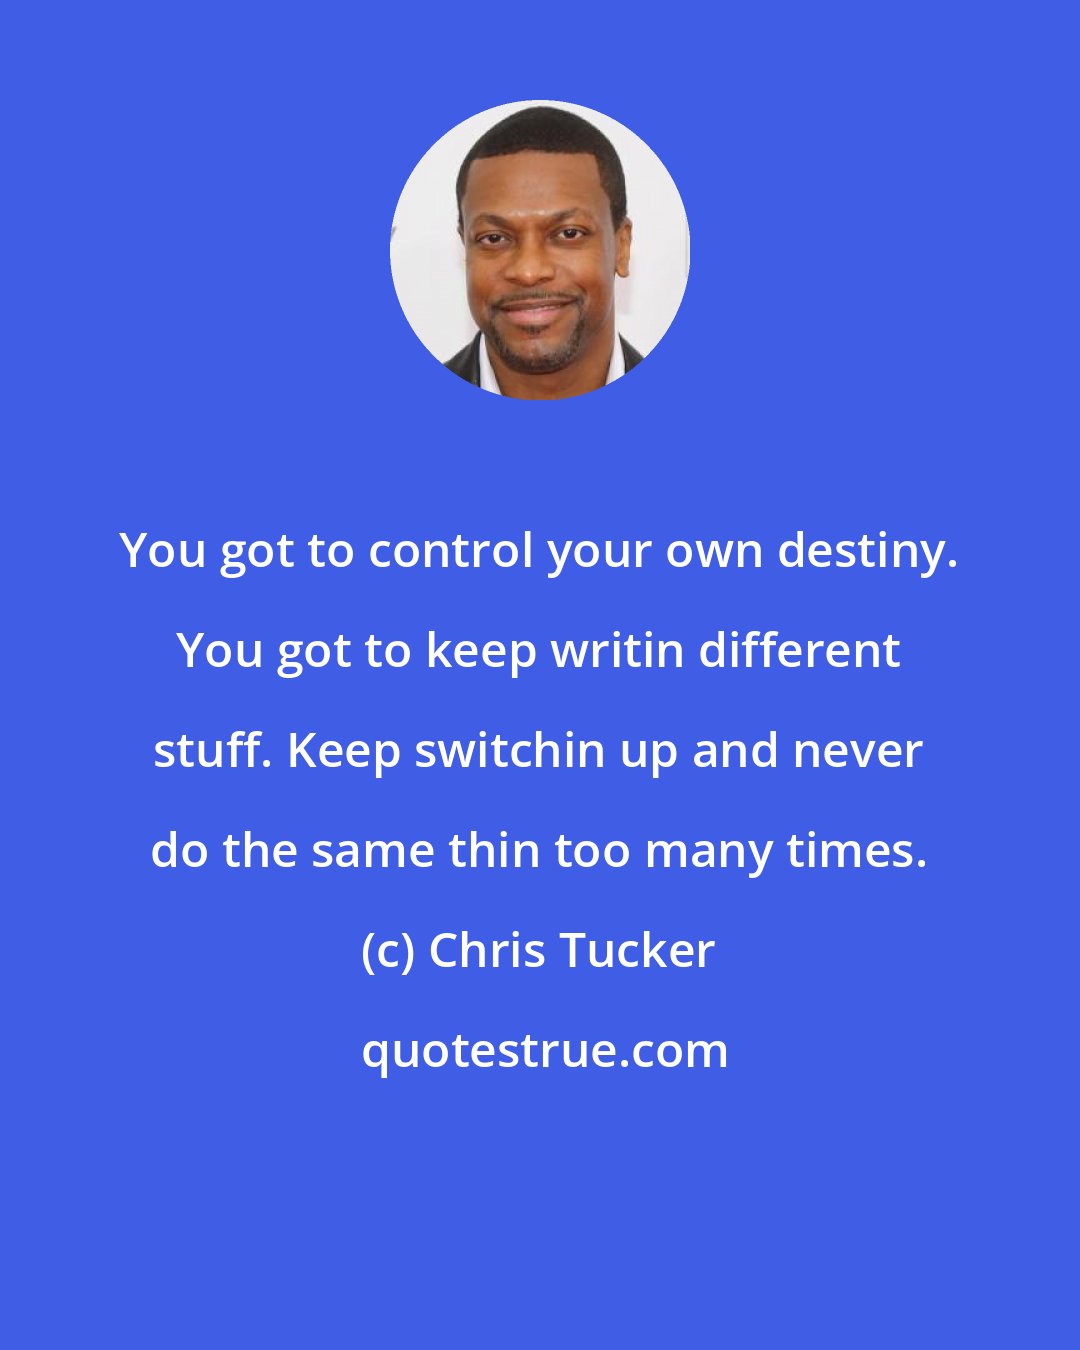 Chris Tucker: You got to control your own destiny. You got to keep writin different stuff. Keep switchin up and never do the same thin too many times.